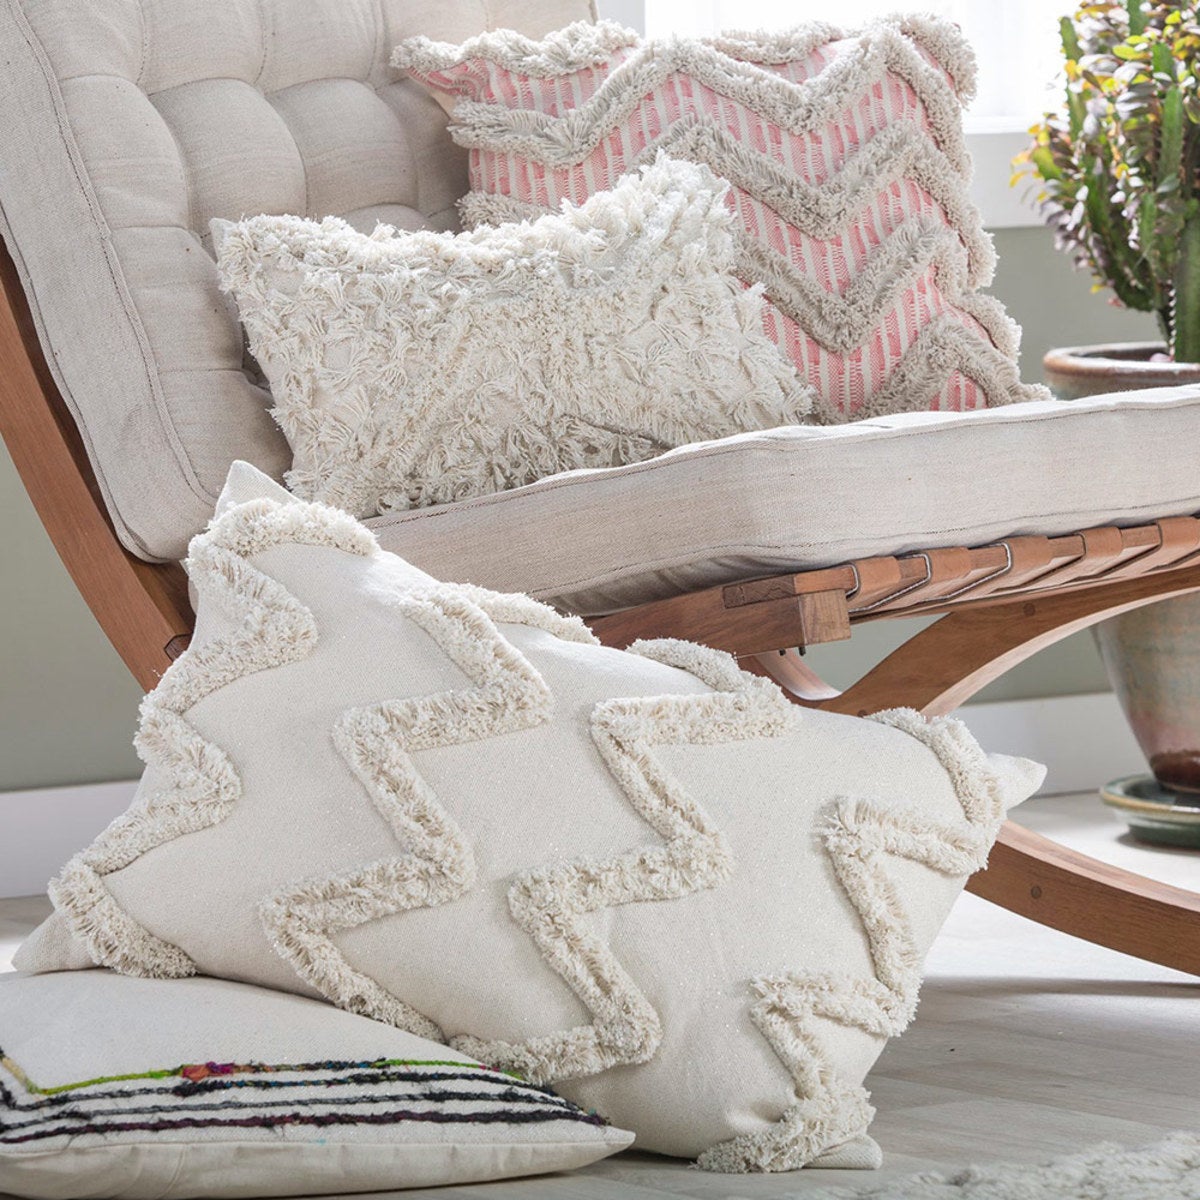 Shimmering Textured Pillows